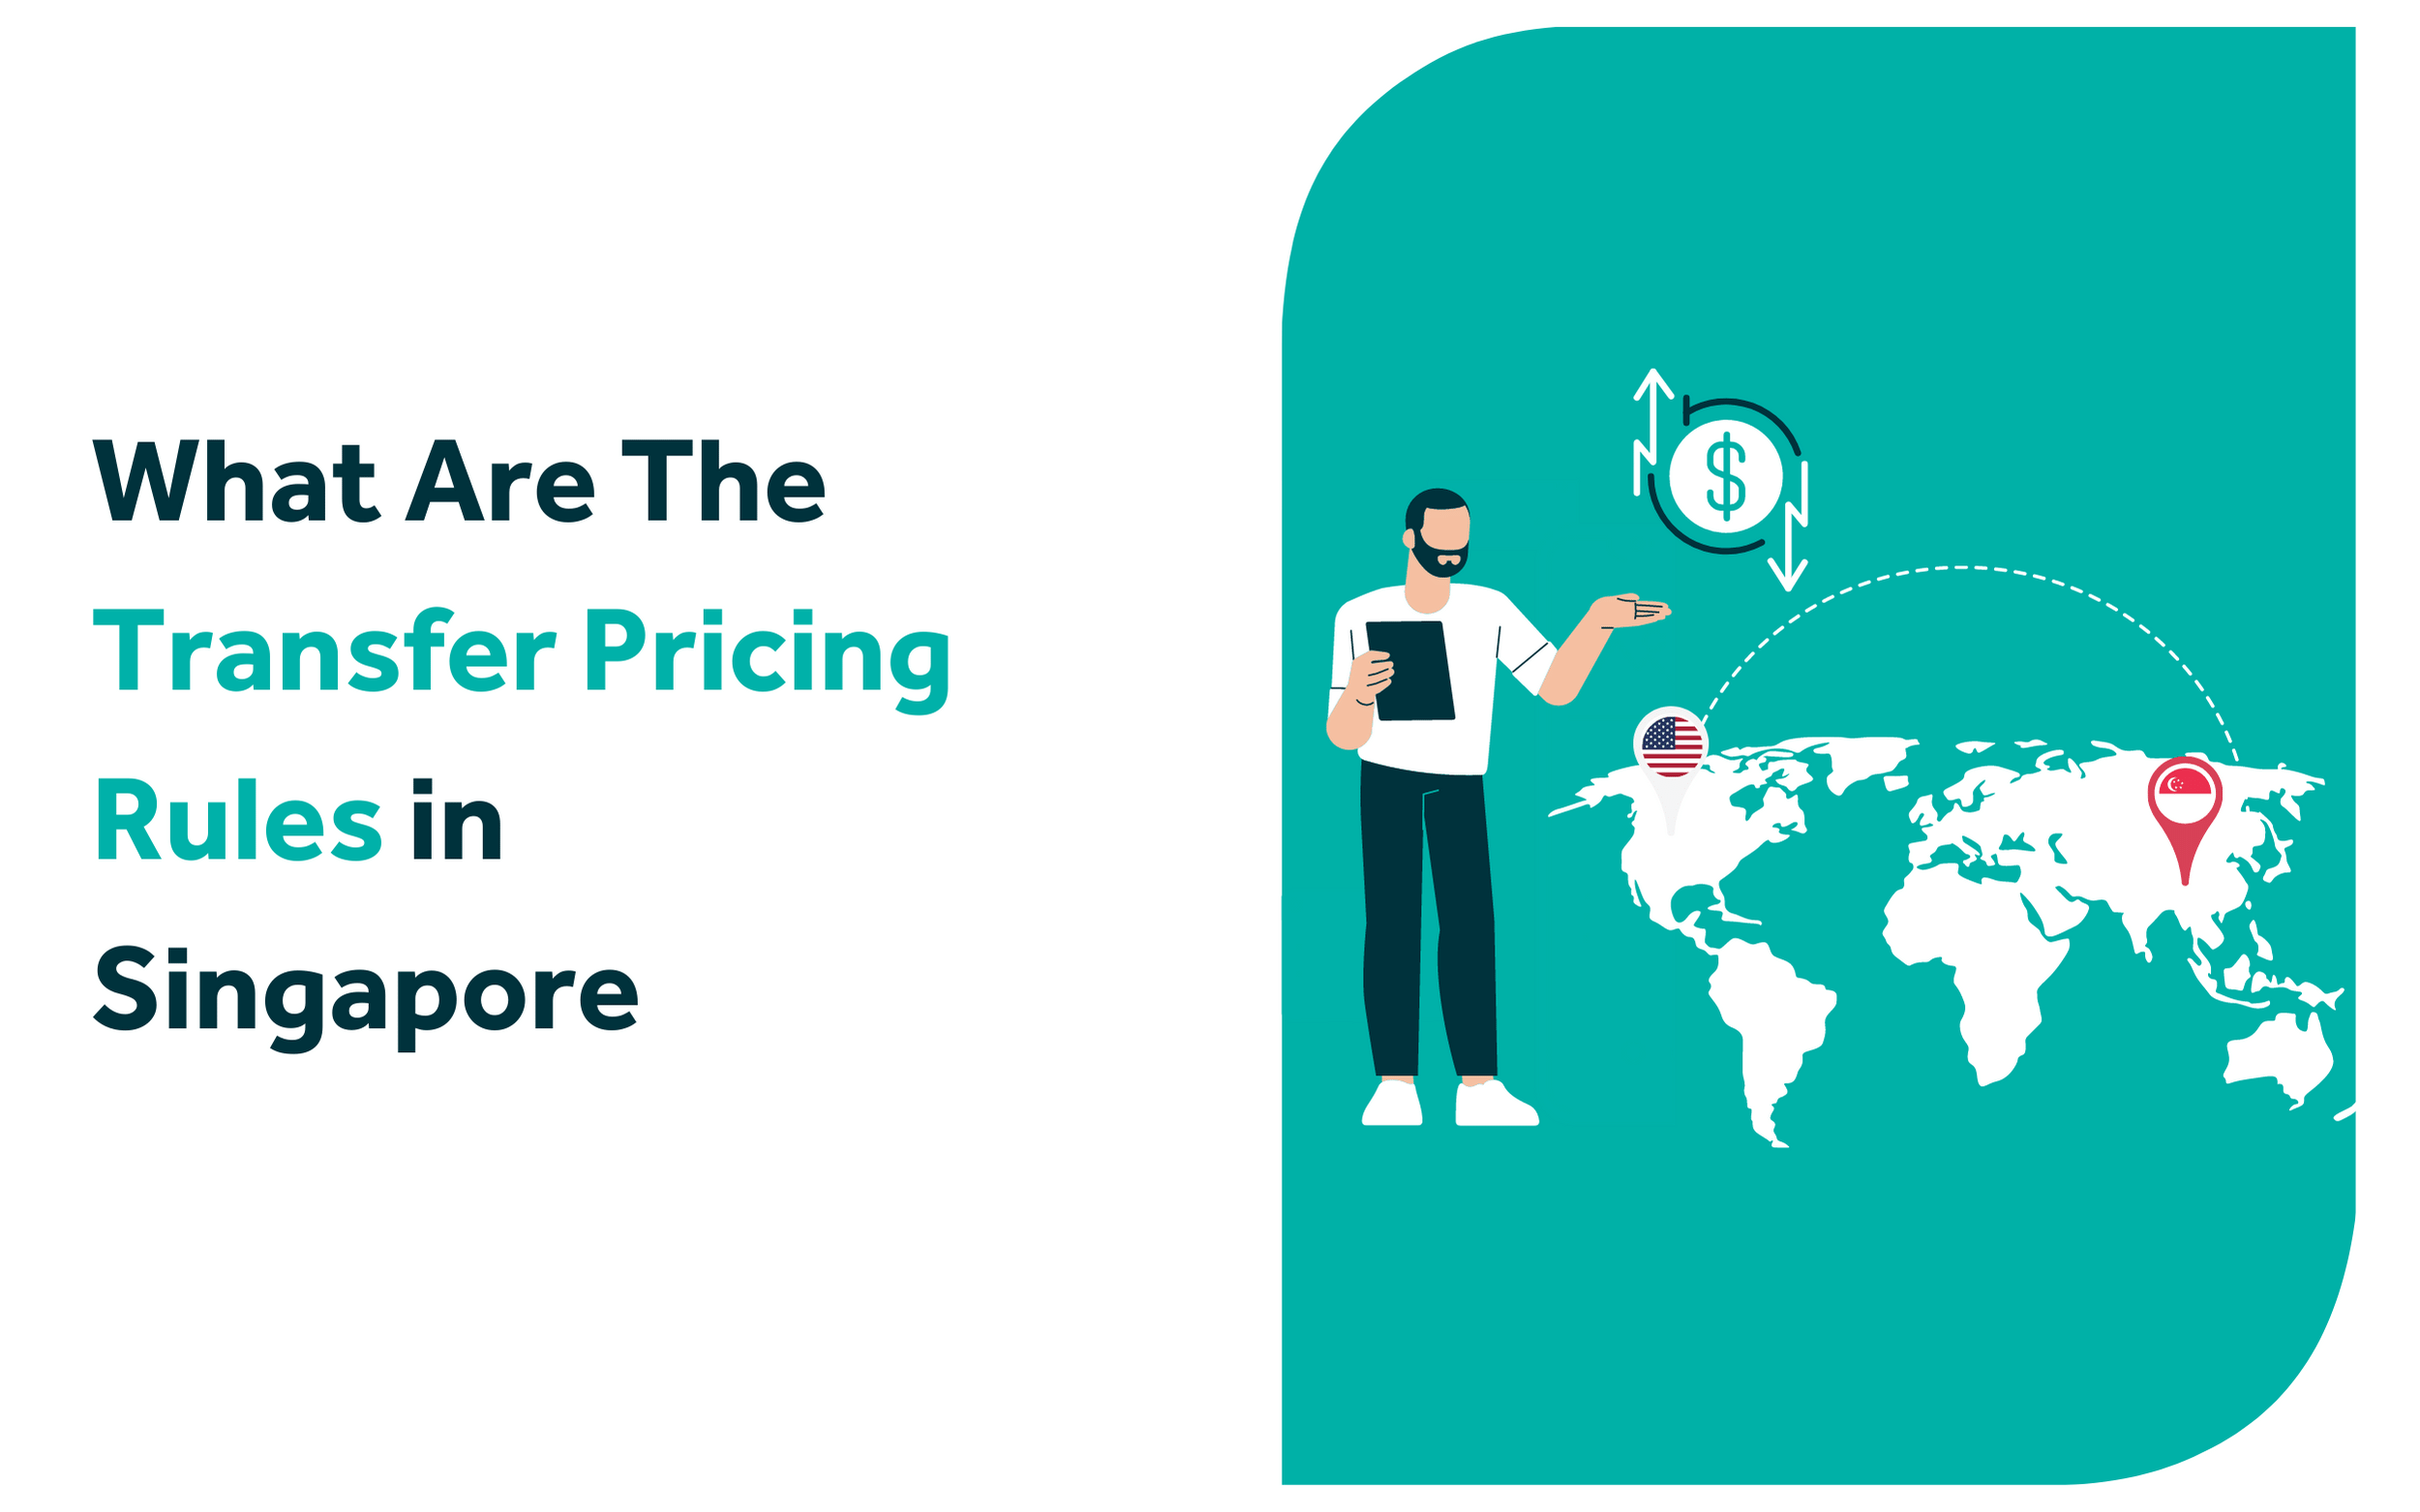 What Are The Transfer Pricing Rules in Singapore